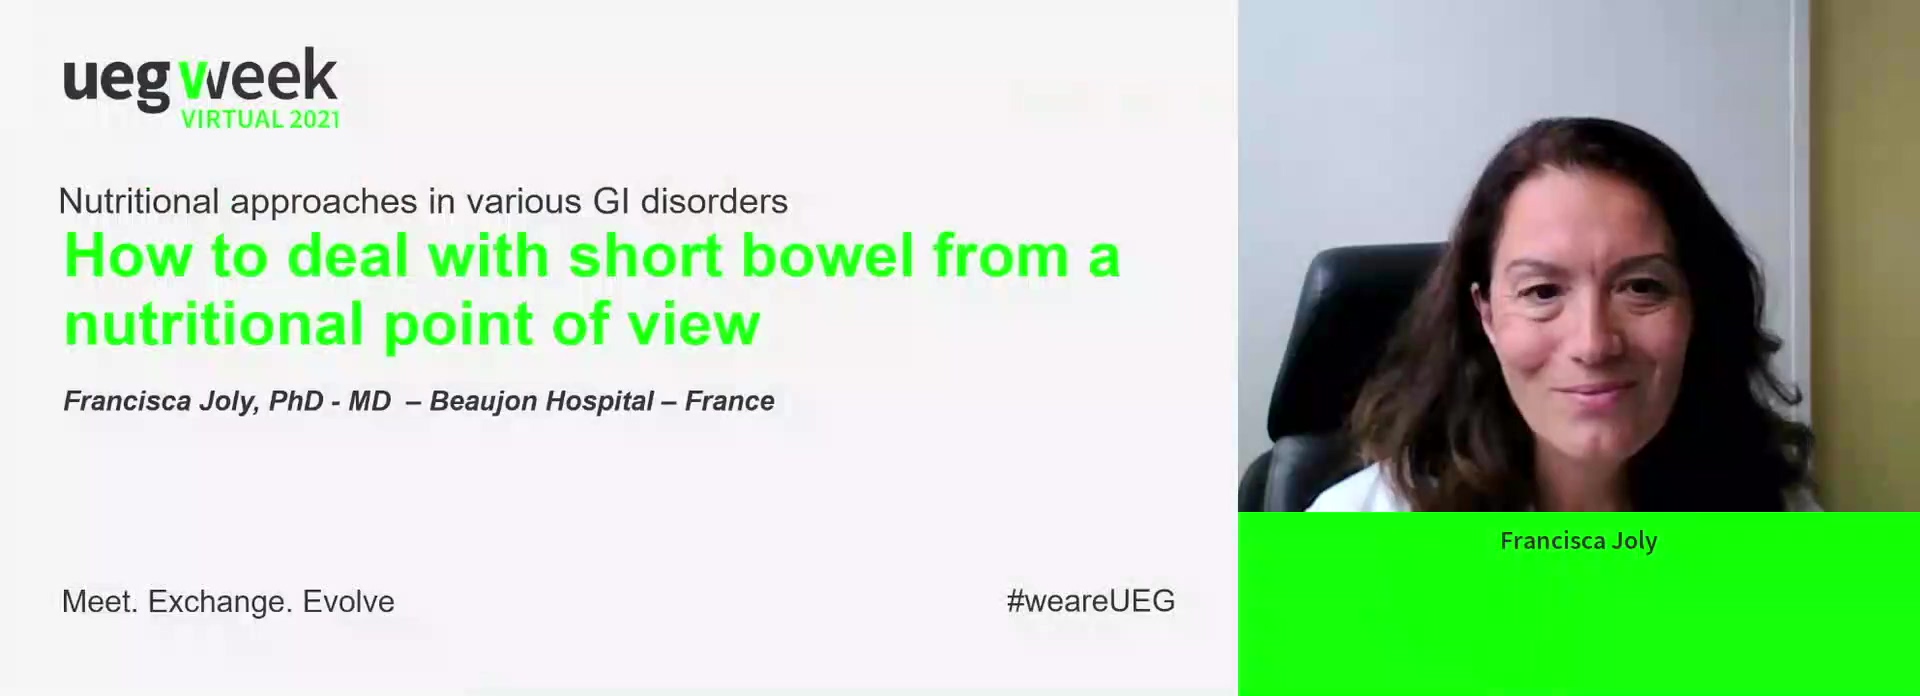 How to deal with short bowel from a nutritional point of view